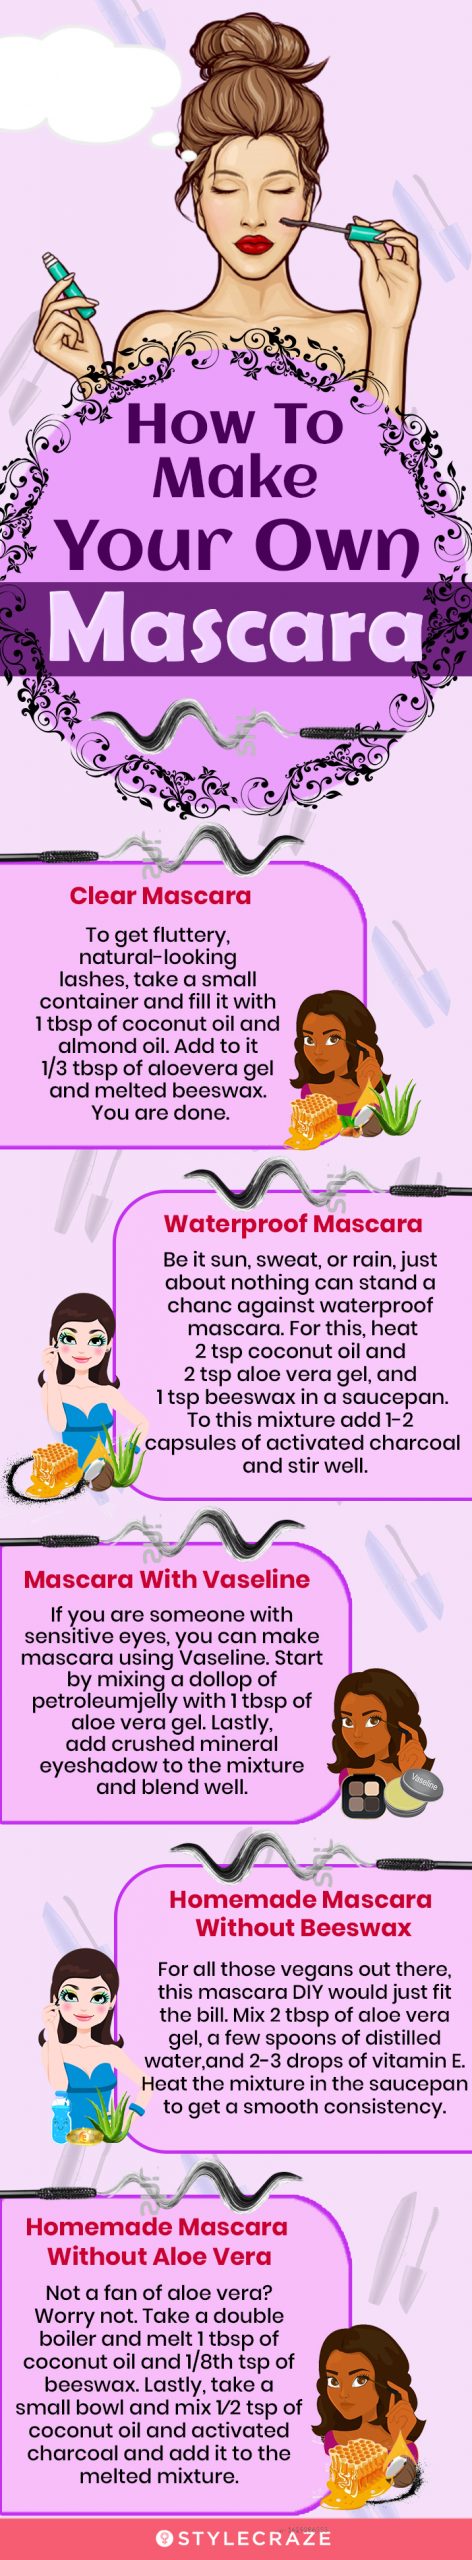 how to make your own mascara? (infographic)